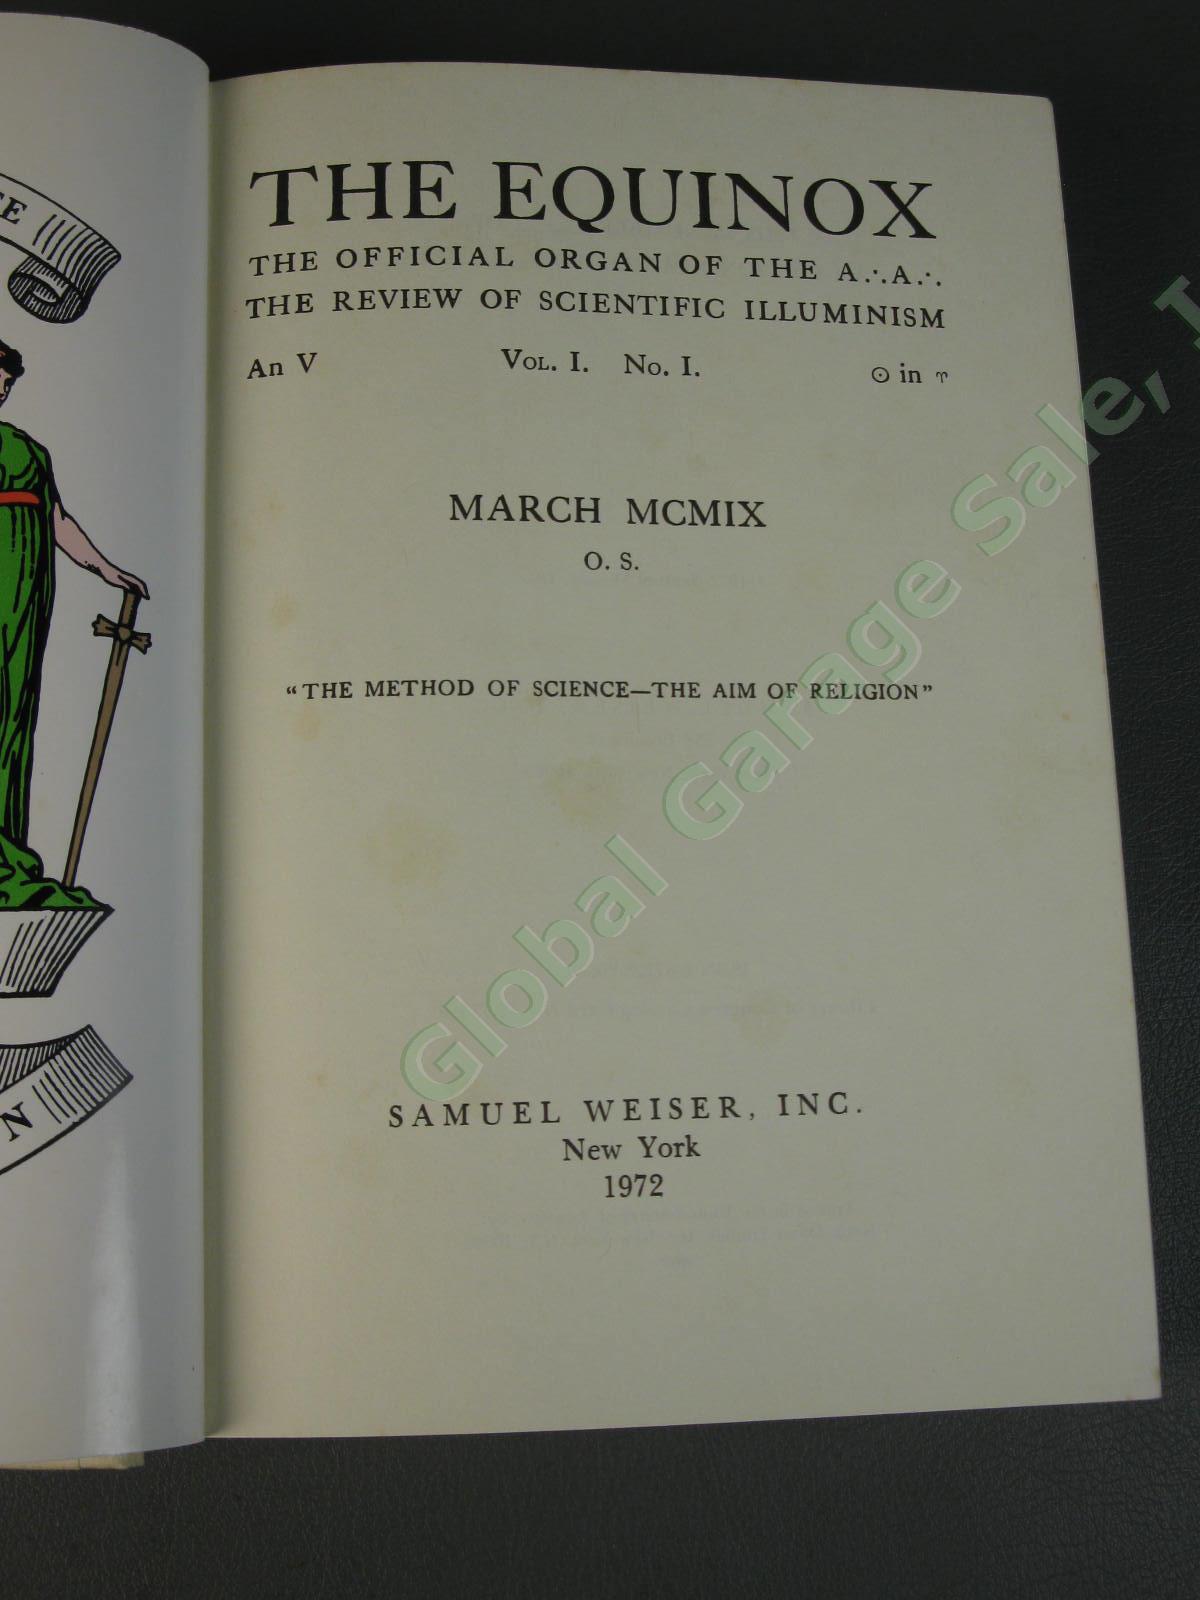 RARE 1972 Aleister Crowley The Equinox Volume 1 COMPLETE Limited Edition 63/515 3